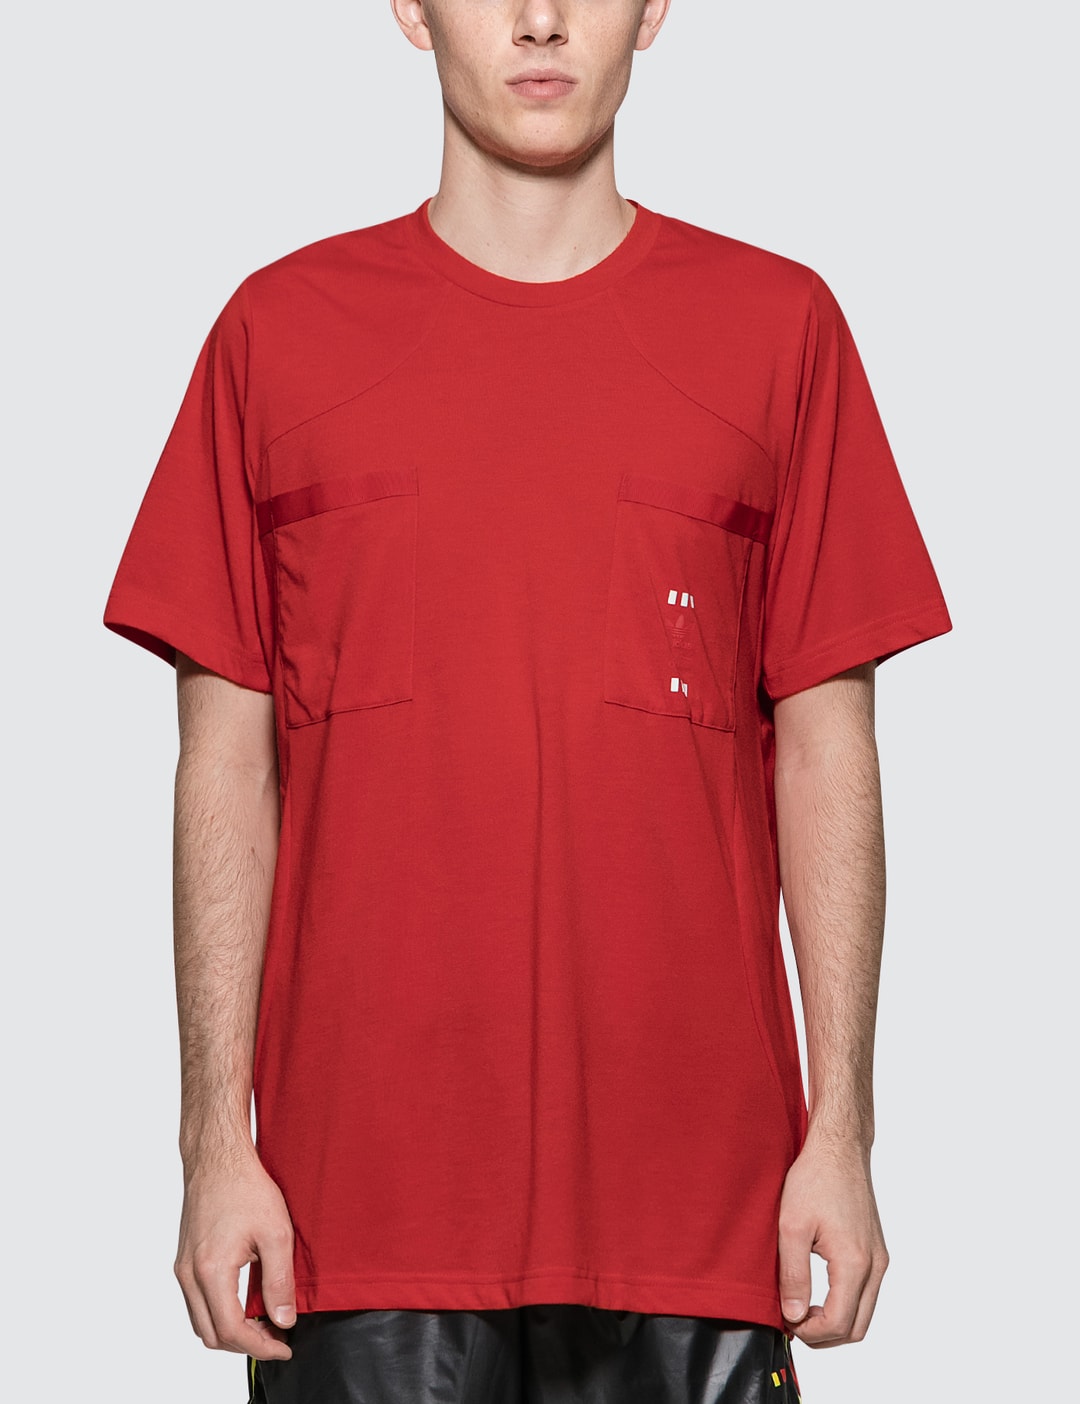 Edelsteen Shinkan Charles Keasing Adidas Originals - Oyster x Adidas 72 Hour S/S T-Shirt | HBX - Globally  Curated Fashion and Lifestyle by Hypebeast